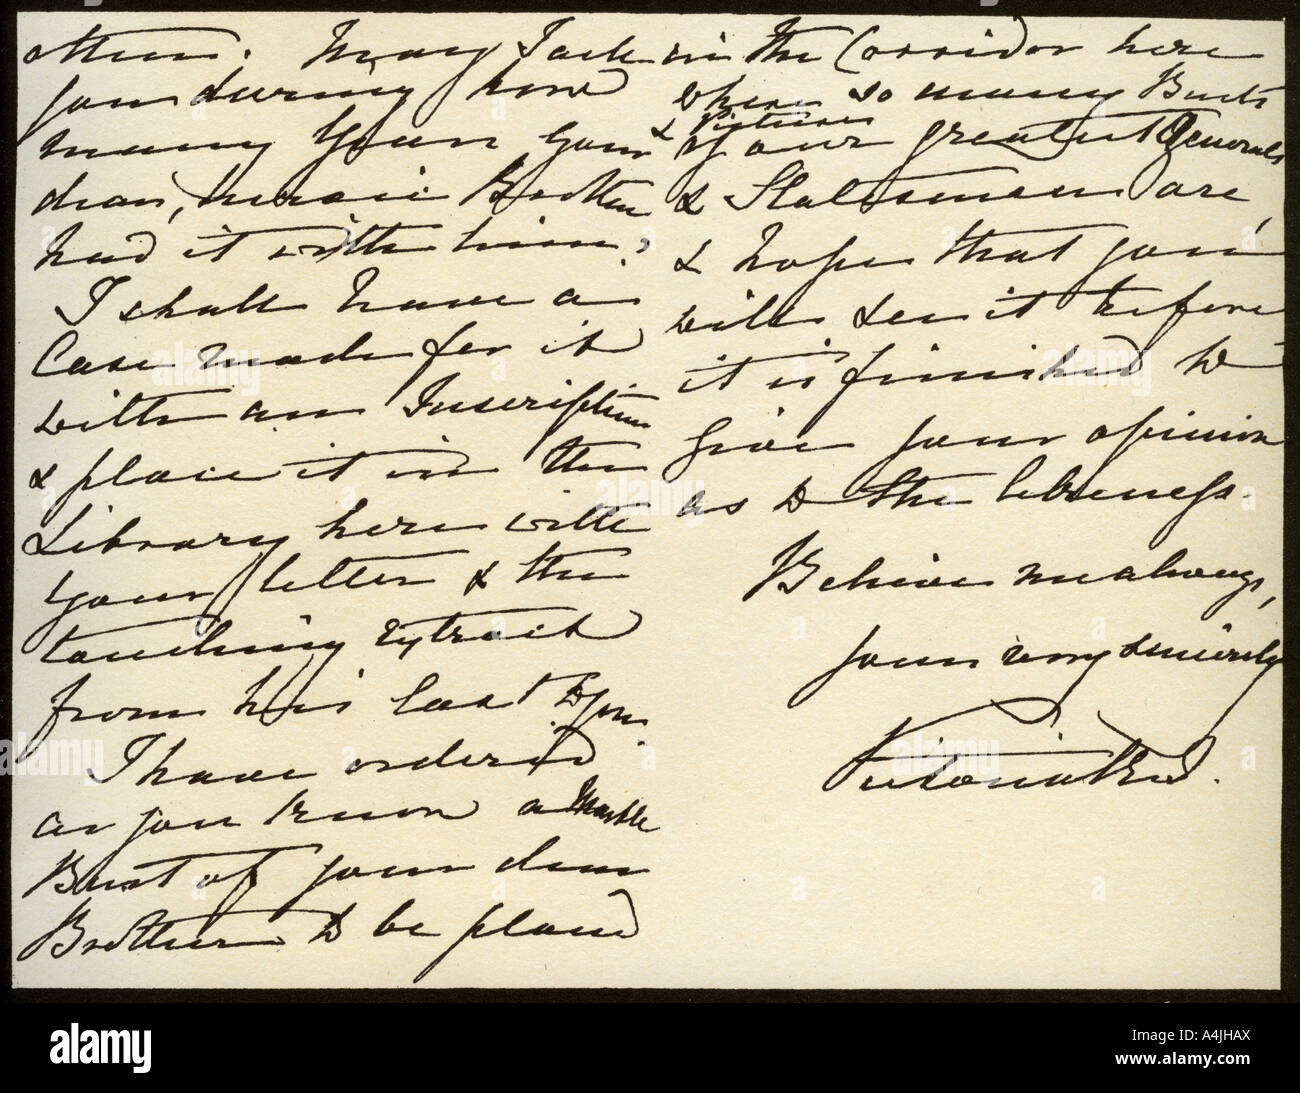 https://c8.alamy.com/comp/A4JHAX/letter-from-queen-victoria-to-mary-augusta-gordon-windsor-castle-16th-A4JHAX.jpg